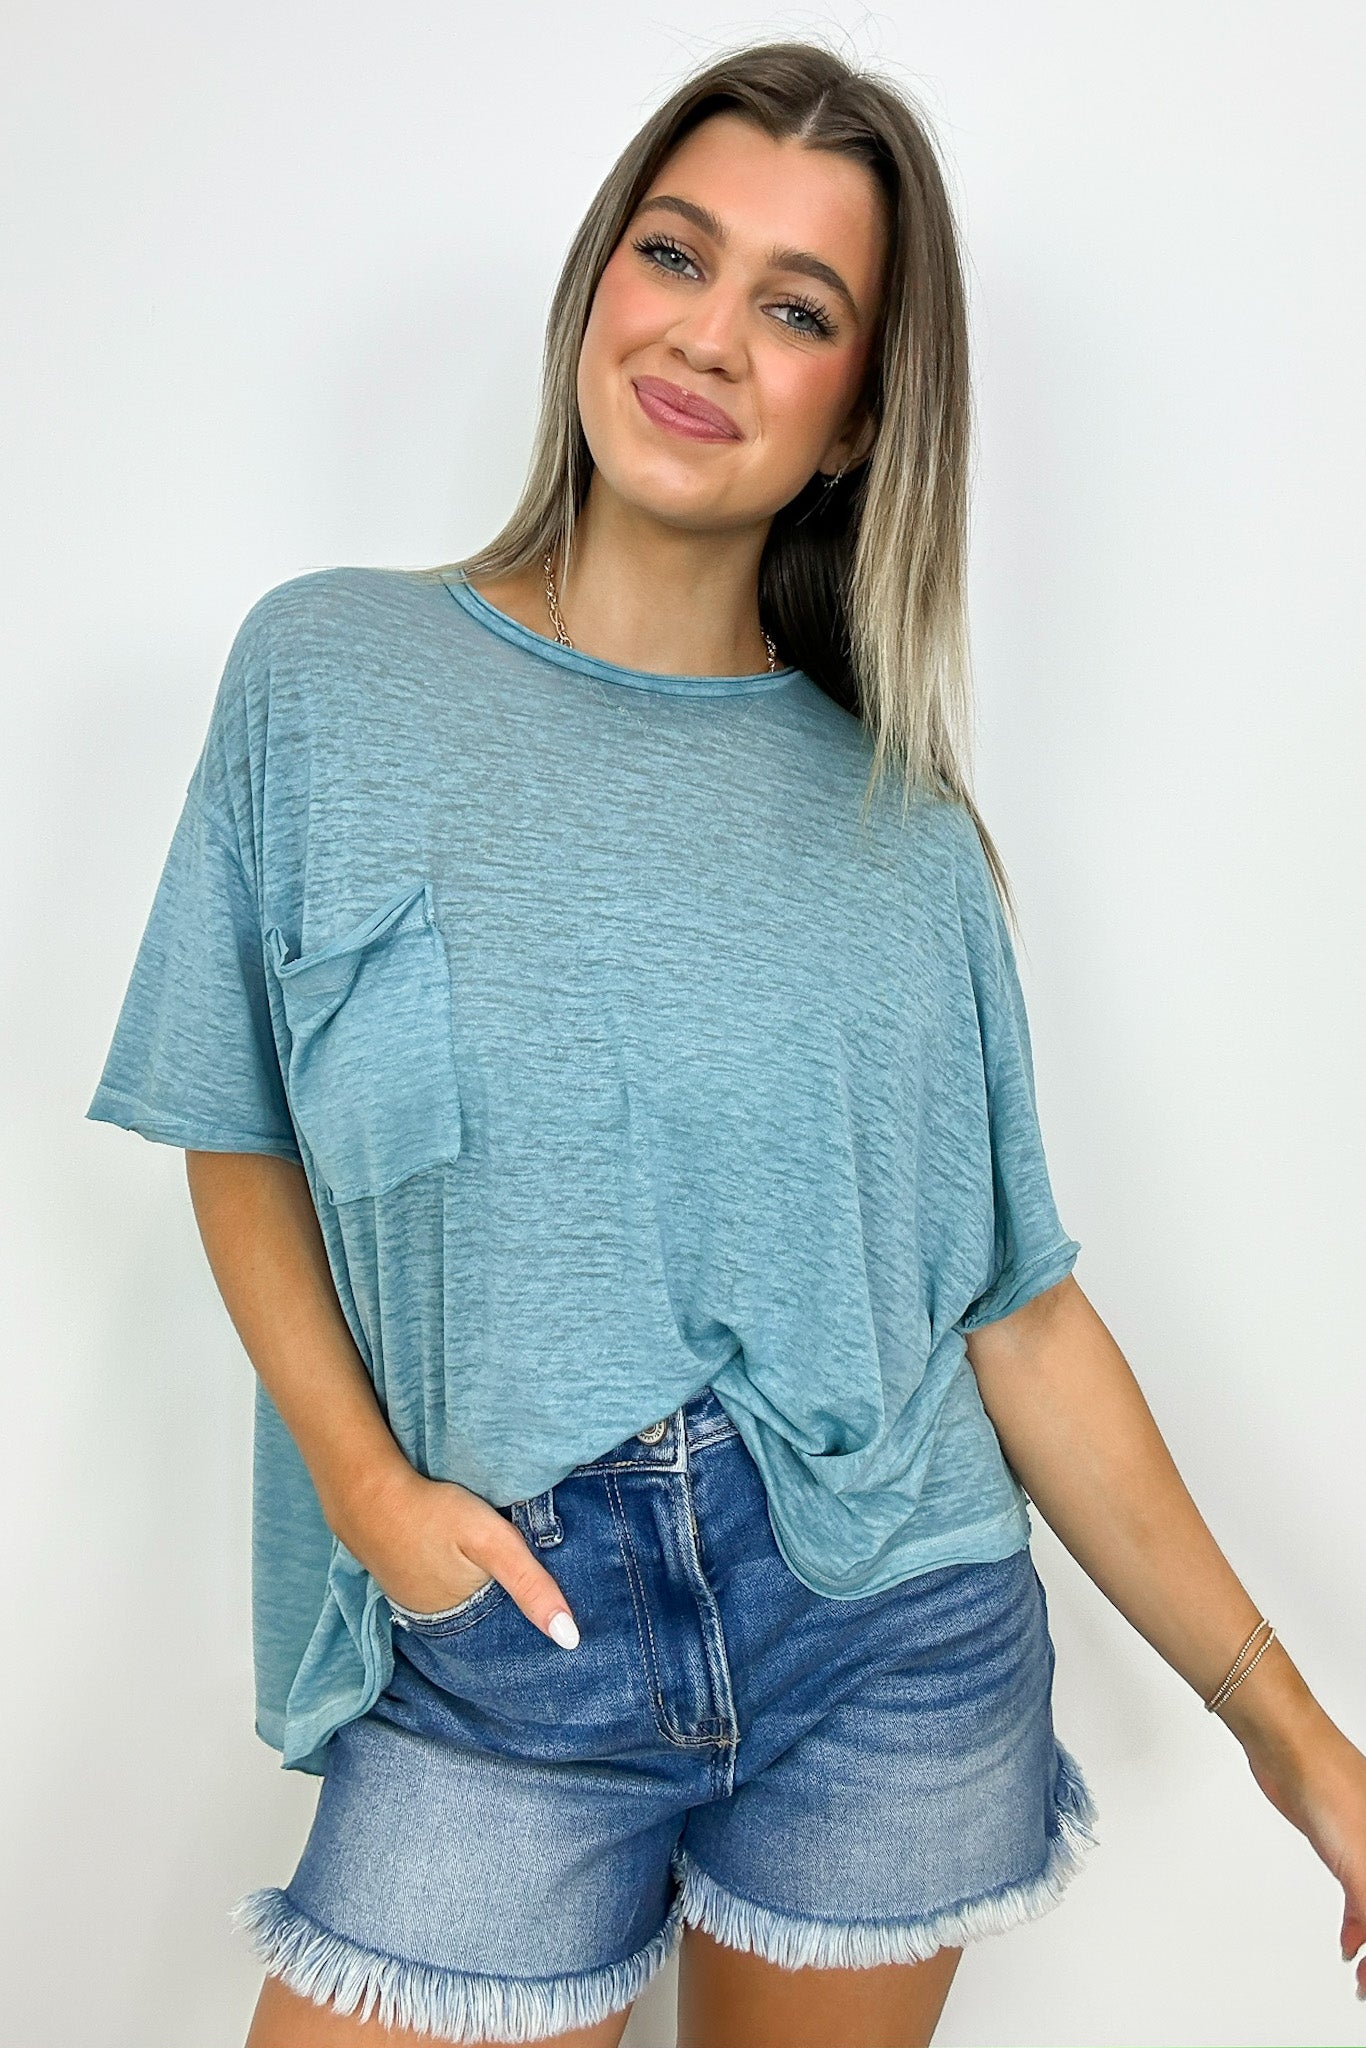 Blue Gray / SM Marisol Burnout Wash Oversized Pocket Top - BACK IN STOCK - Madison and Mallory